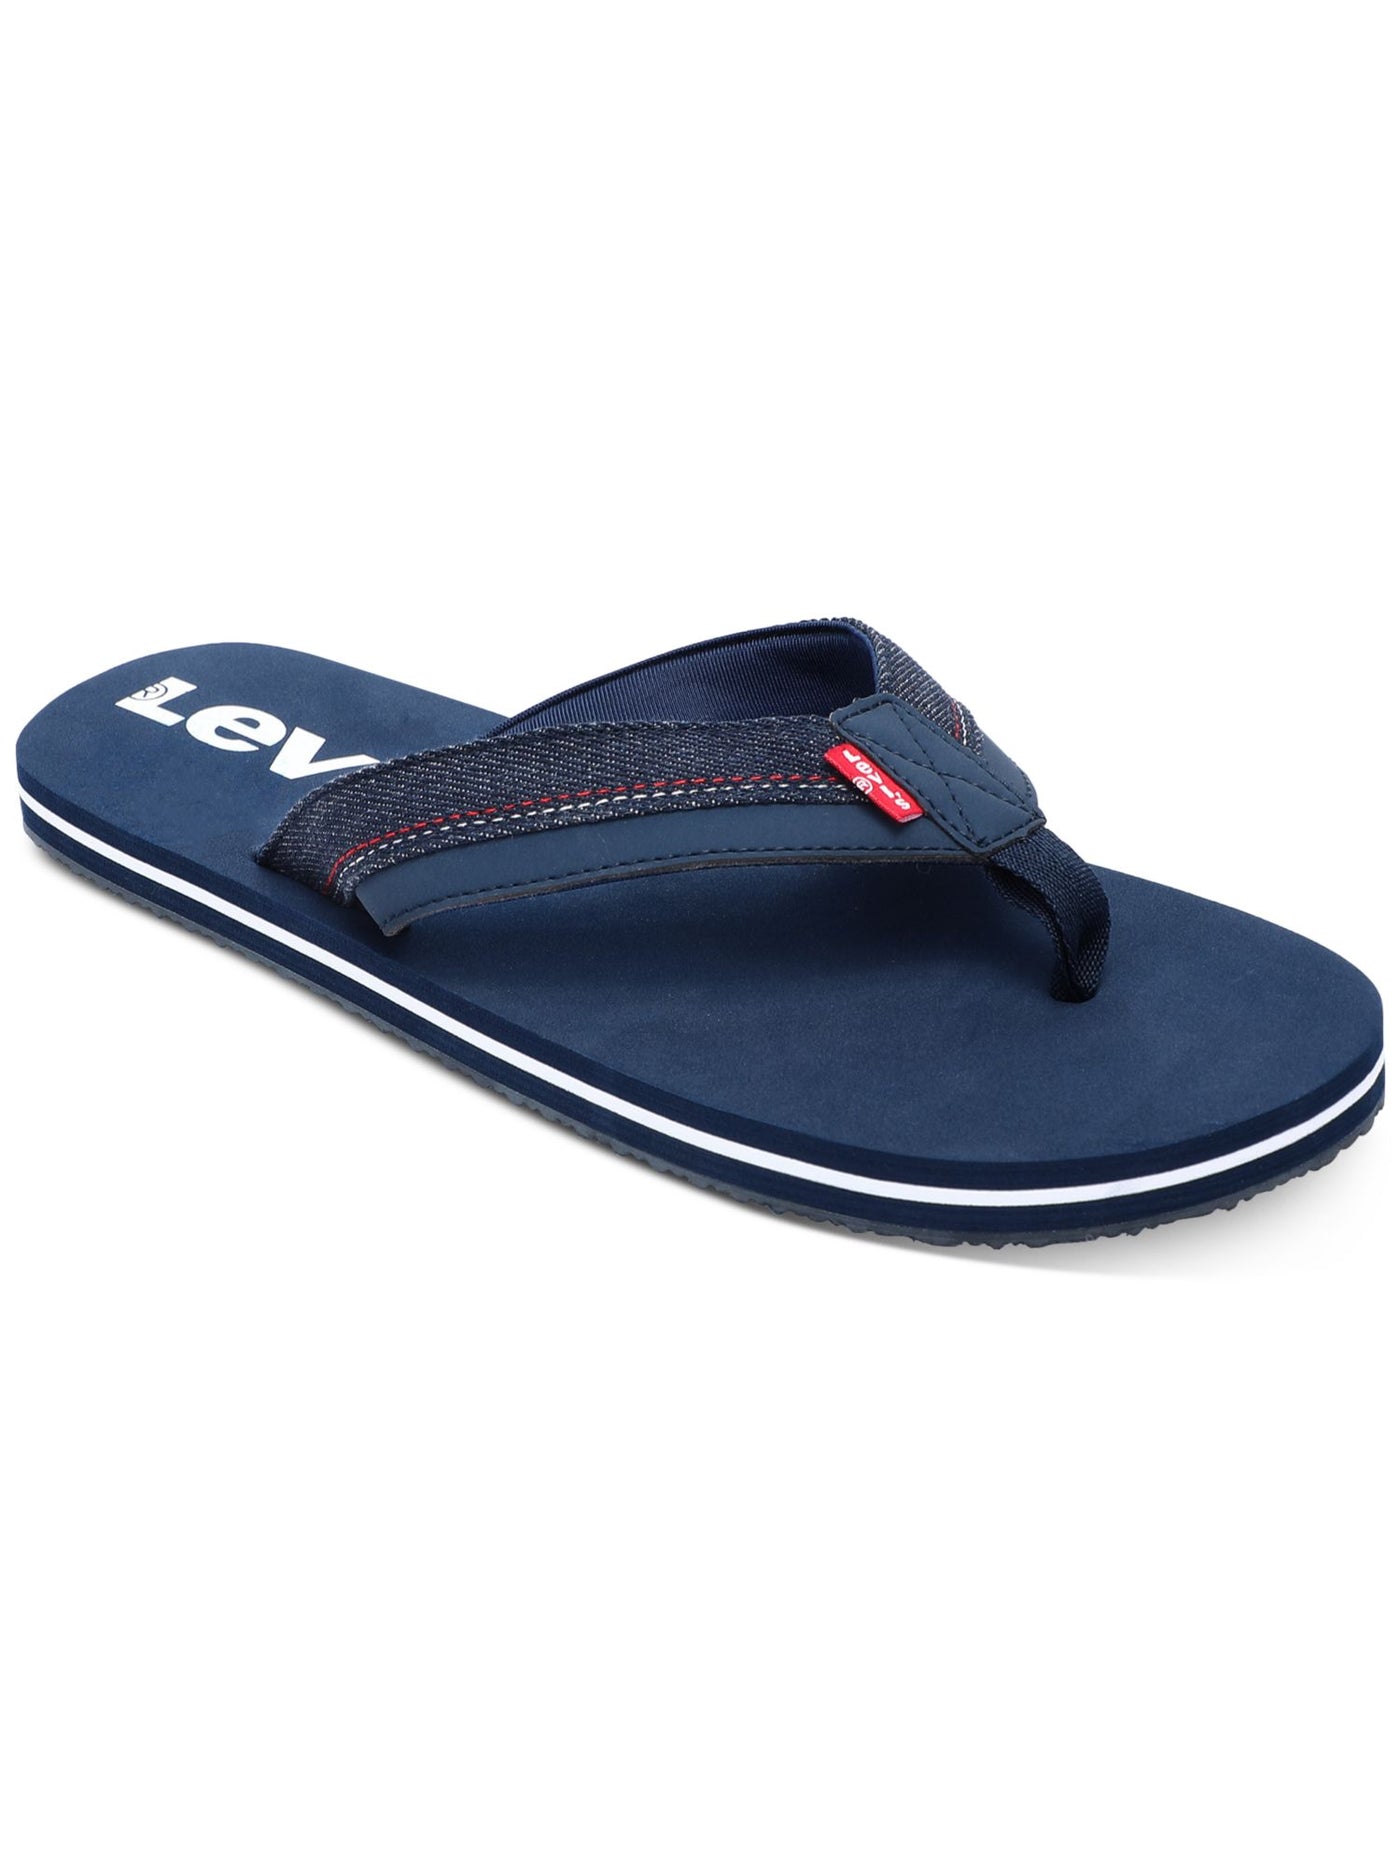 LEVI'S Mens Navy Mixed Media Padded Wordmark Strap Open Toe Slip On Thong Sandals Shoes 8